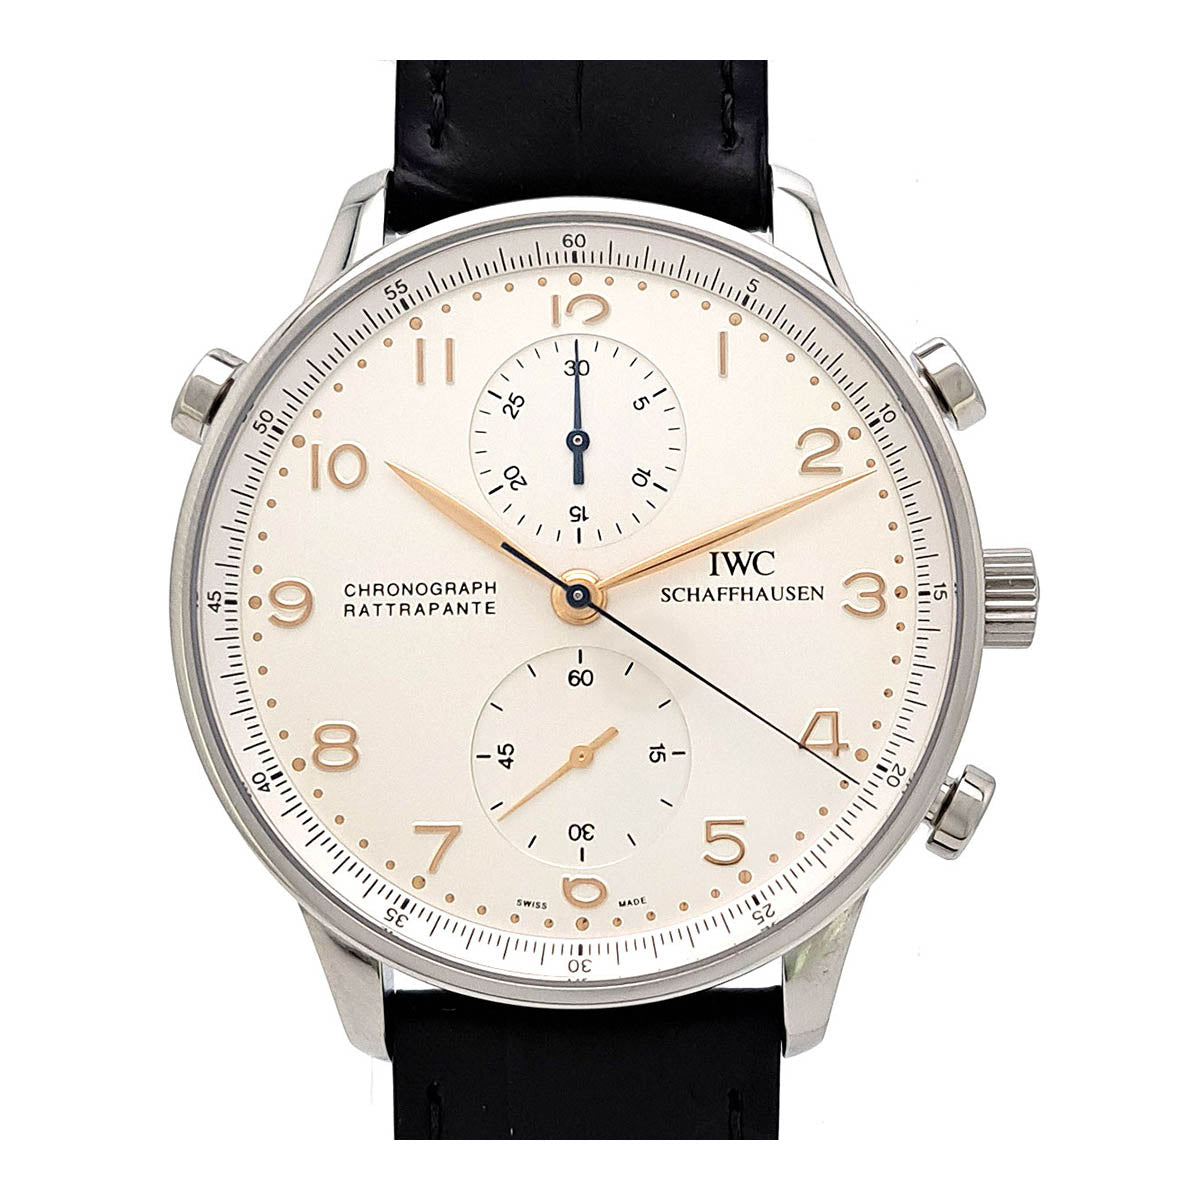 IWC Portugieser Rattrapante Stainless Steel Men's Watch - Overhauled by IWC, Model 3712 3712.0